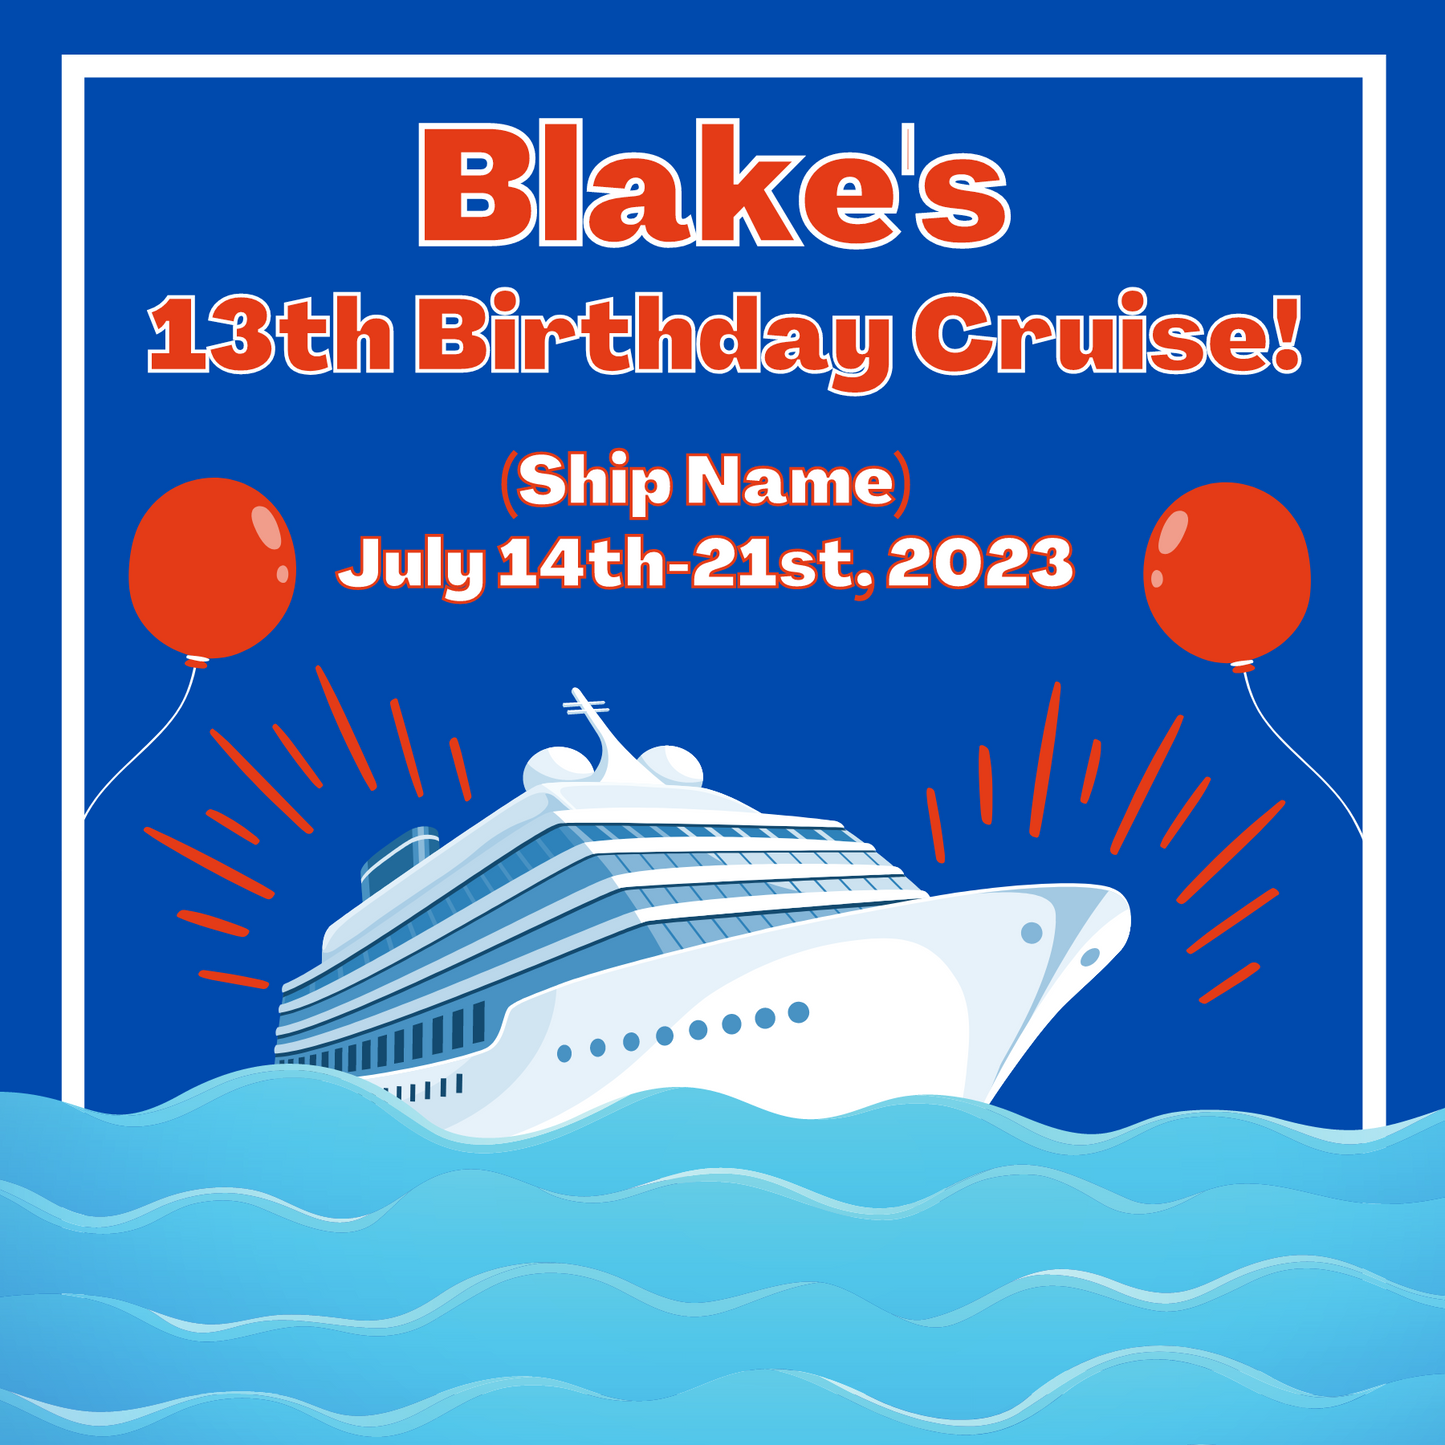 Red and Blue Birthday Cruise